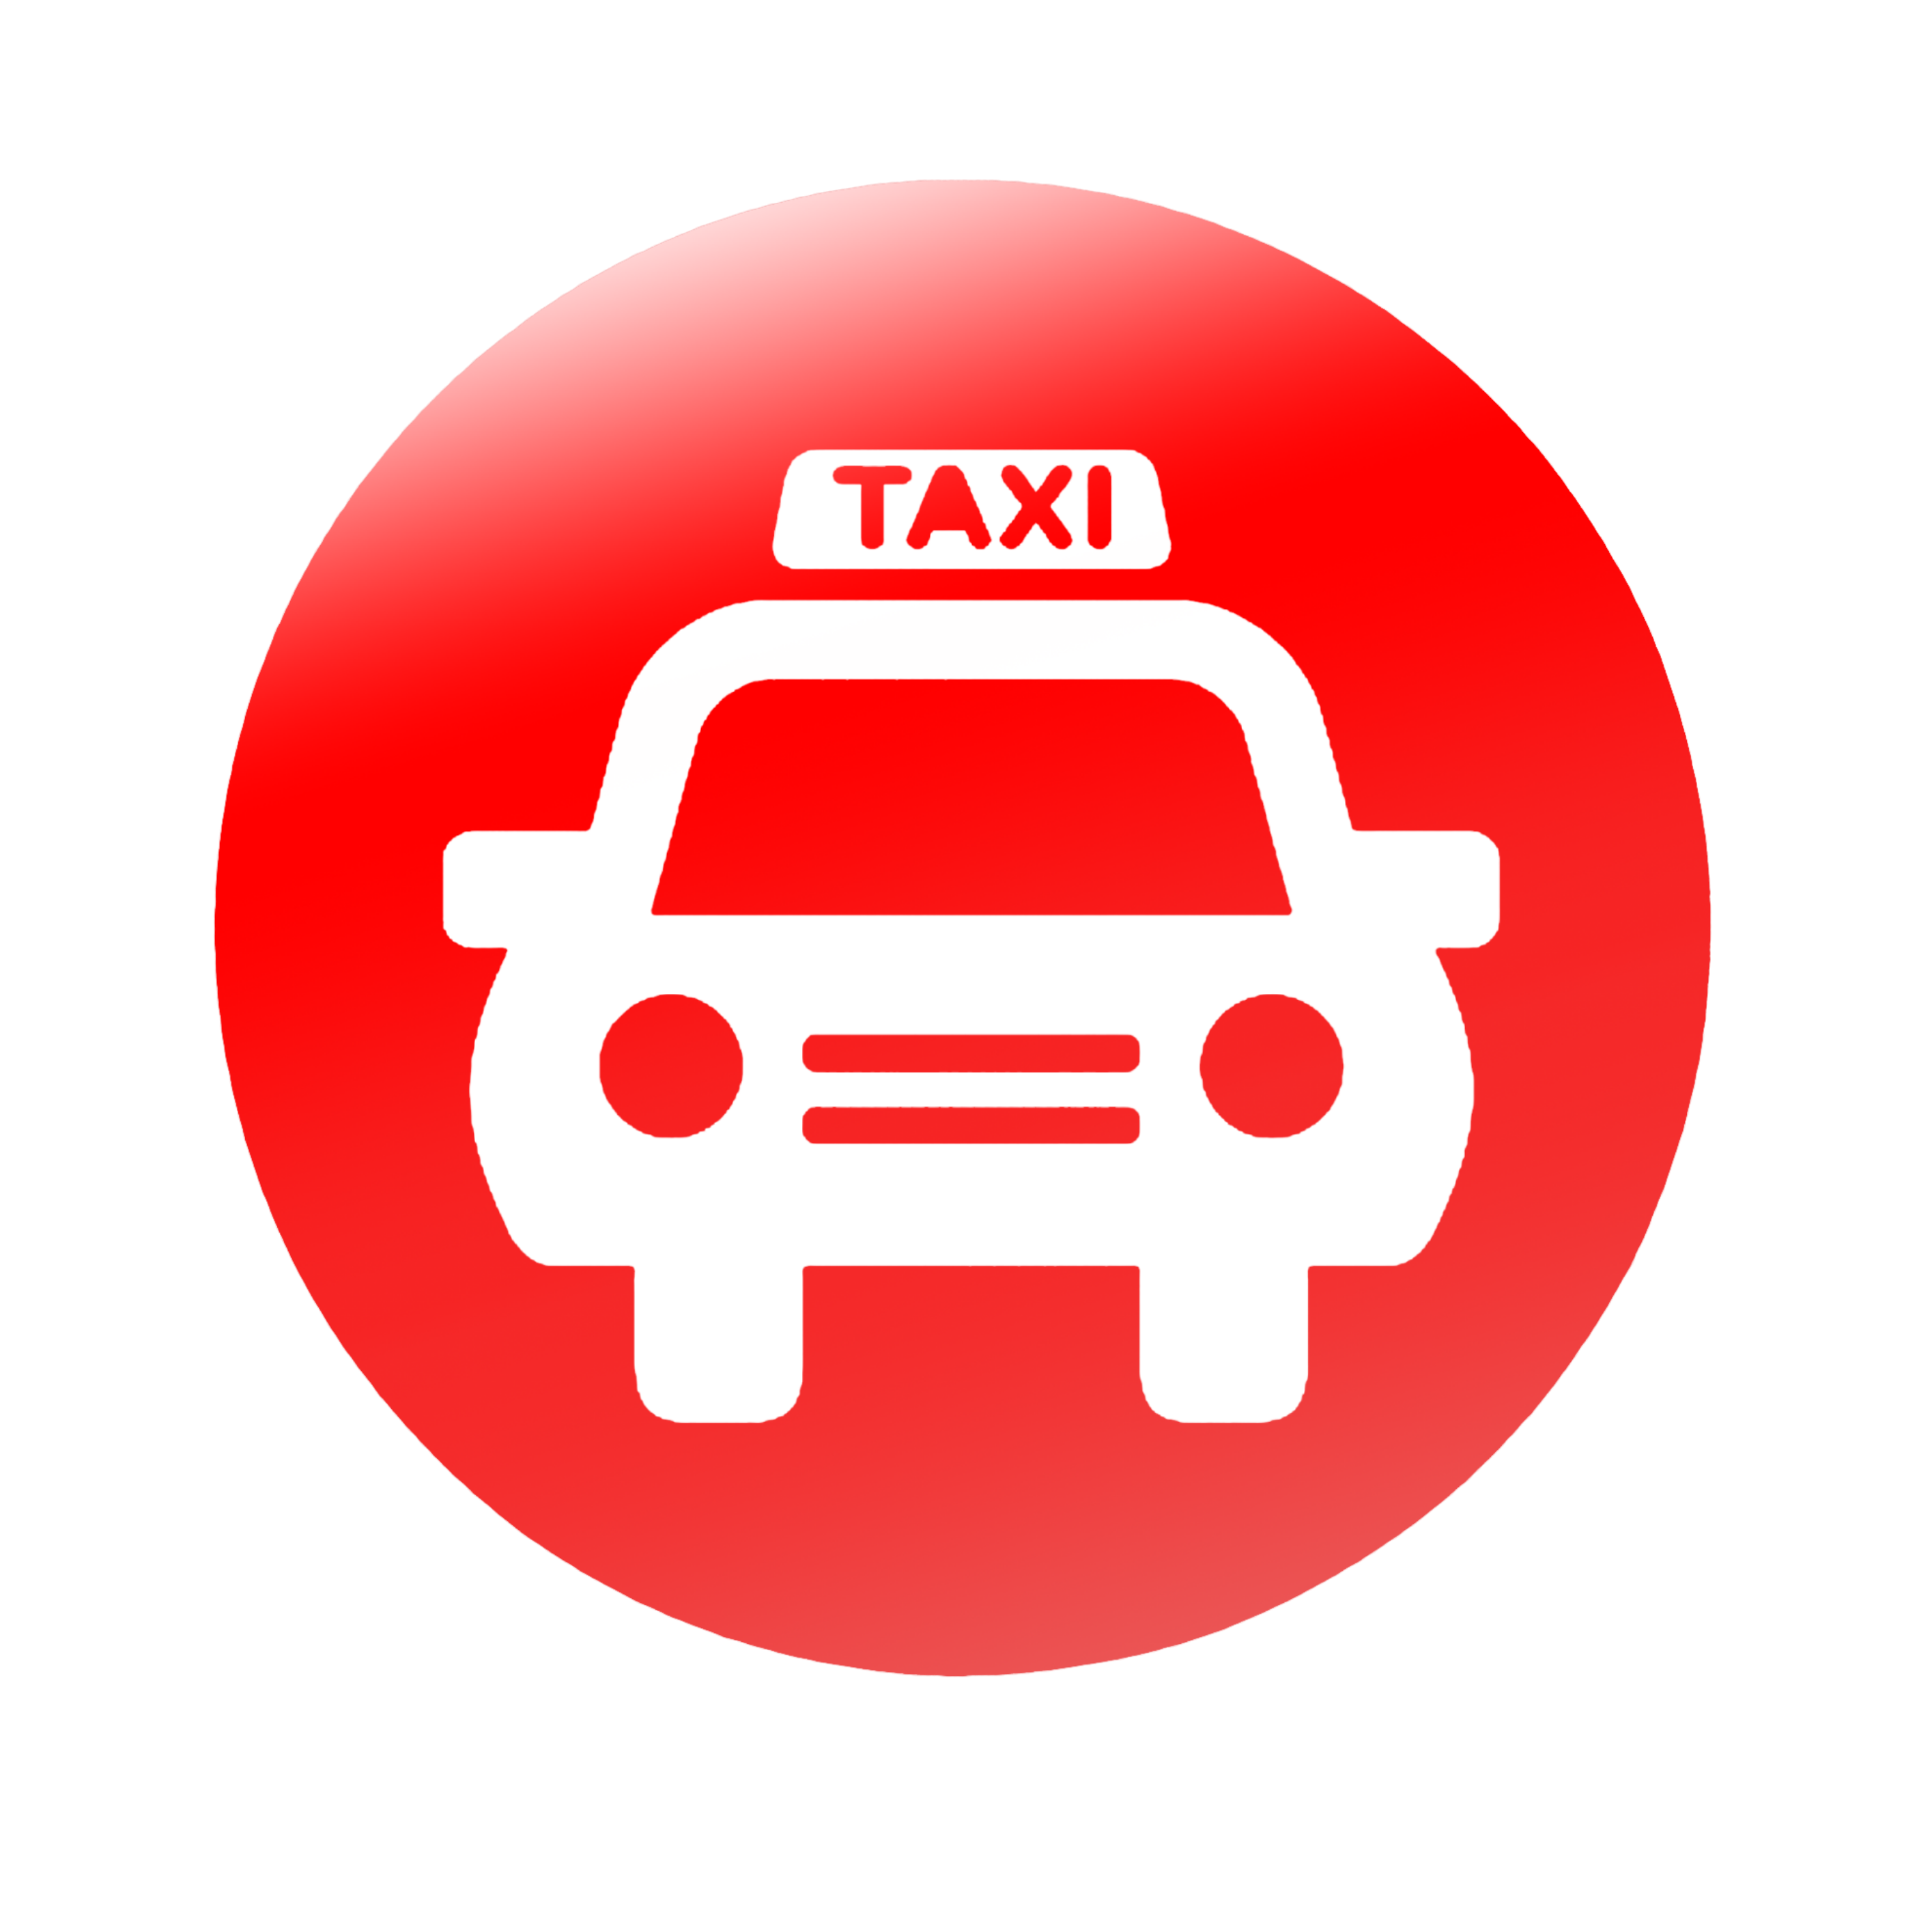 Taxi Circle Icon PNG Image